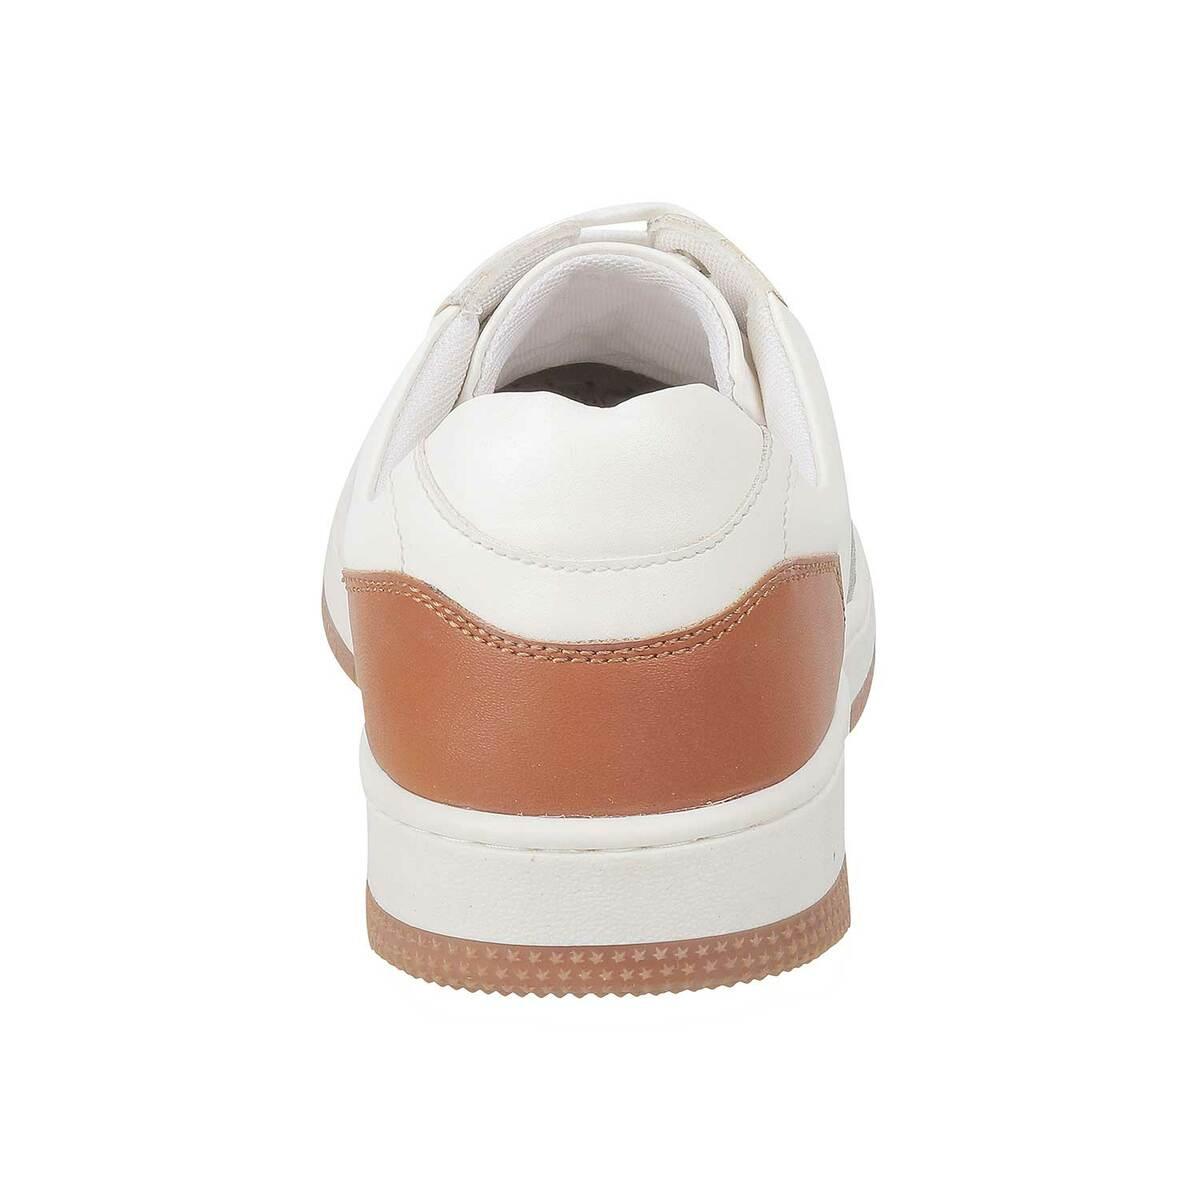 Cavalli Class Men's White Leather Fashion Sneakers Shoes | eBay